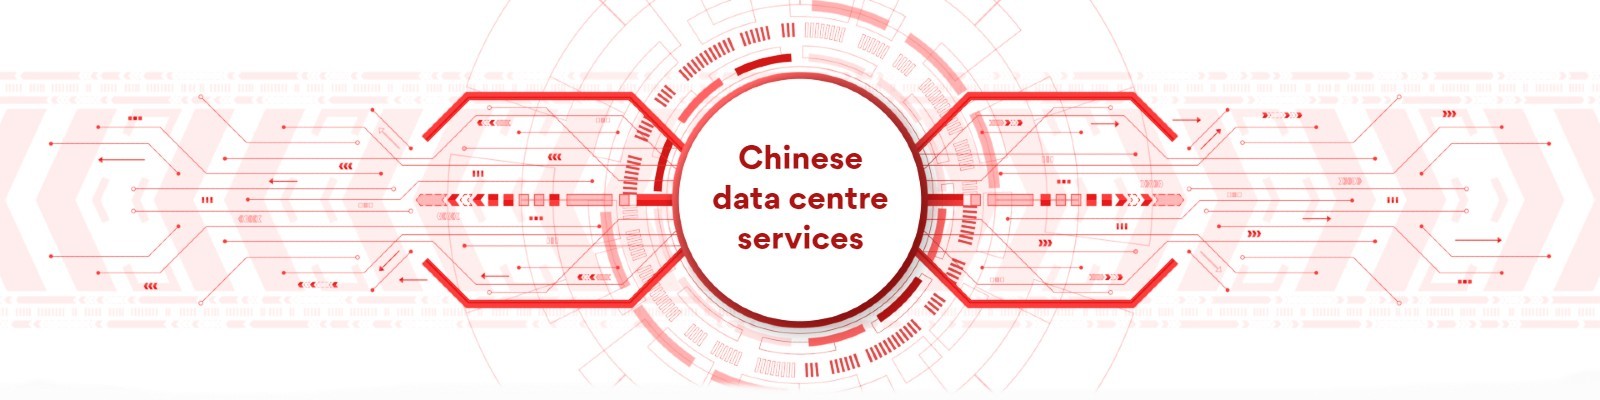 Chinese data centre services